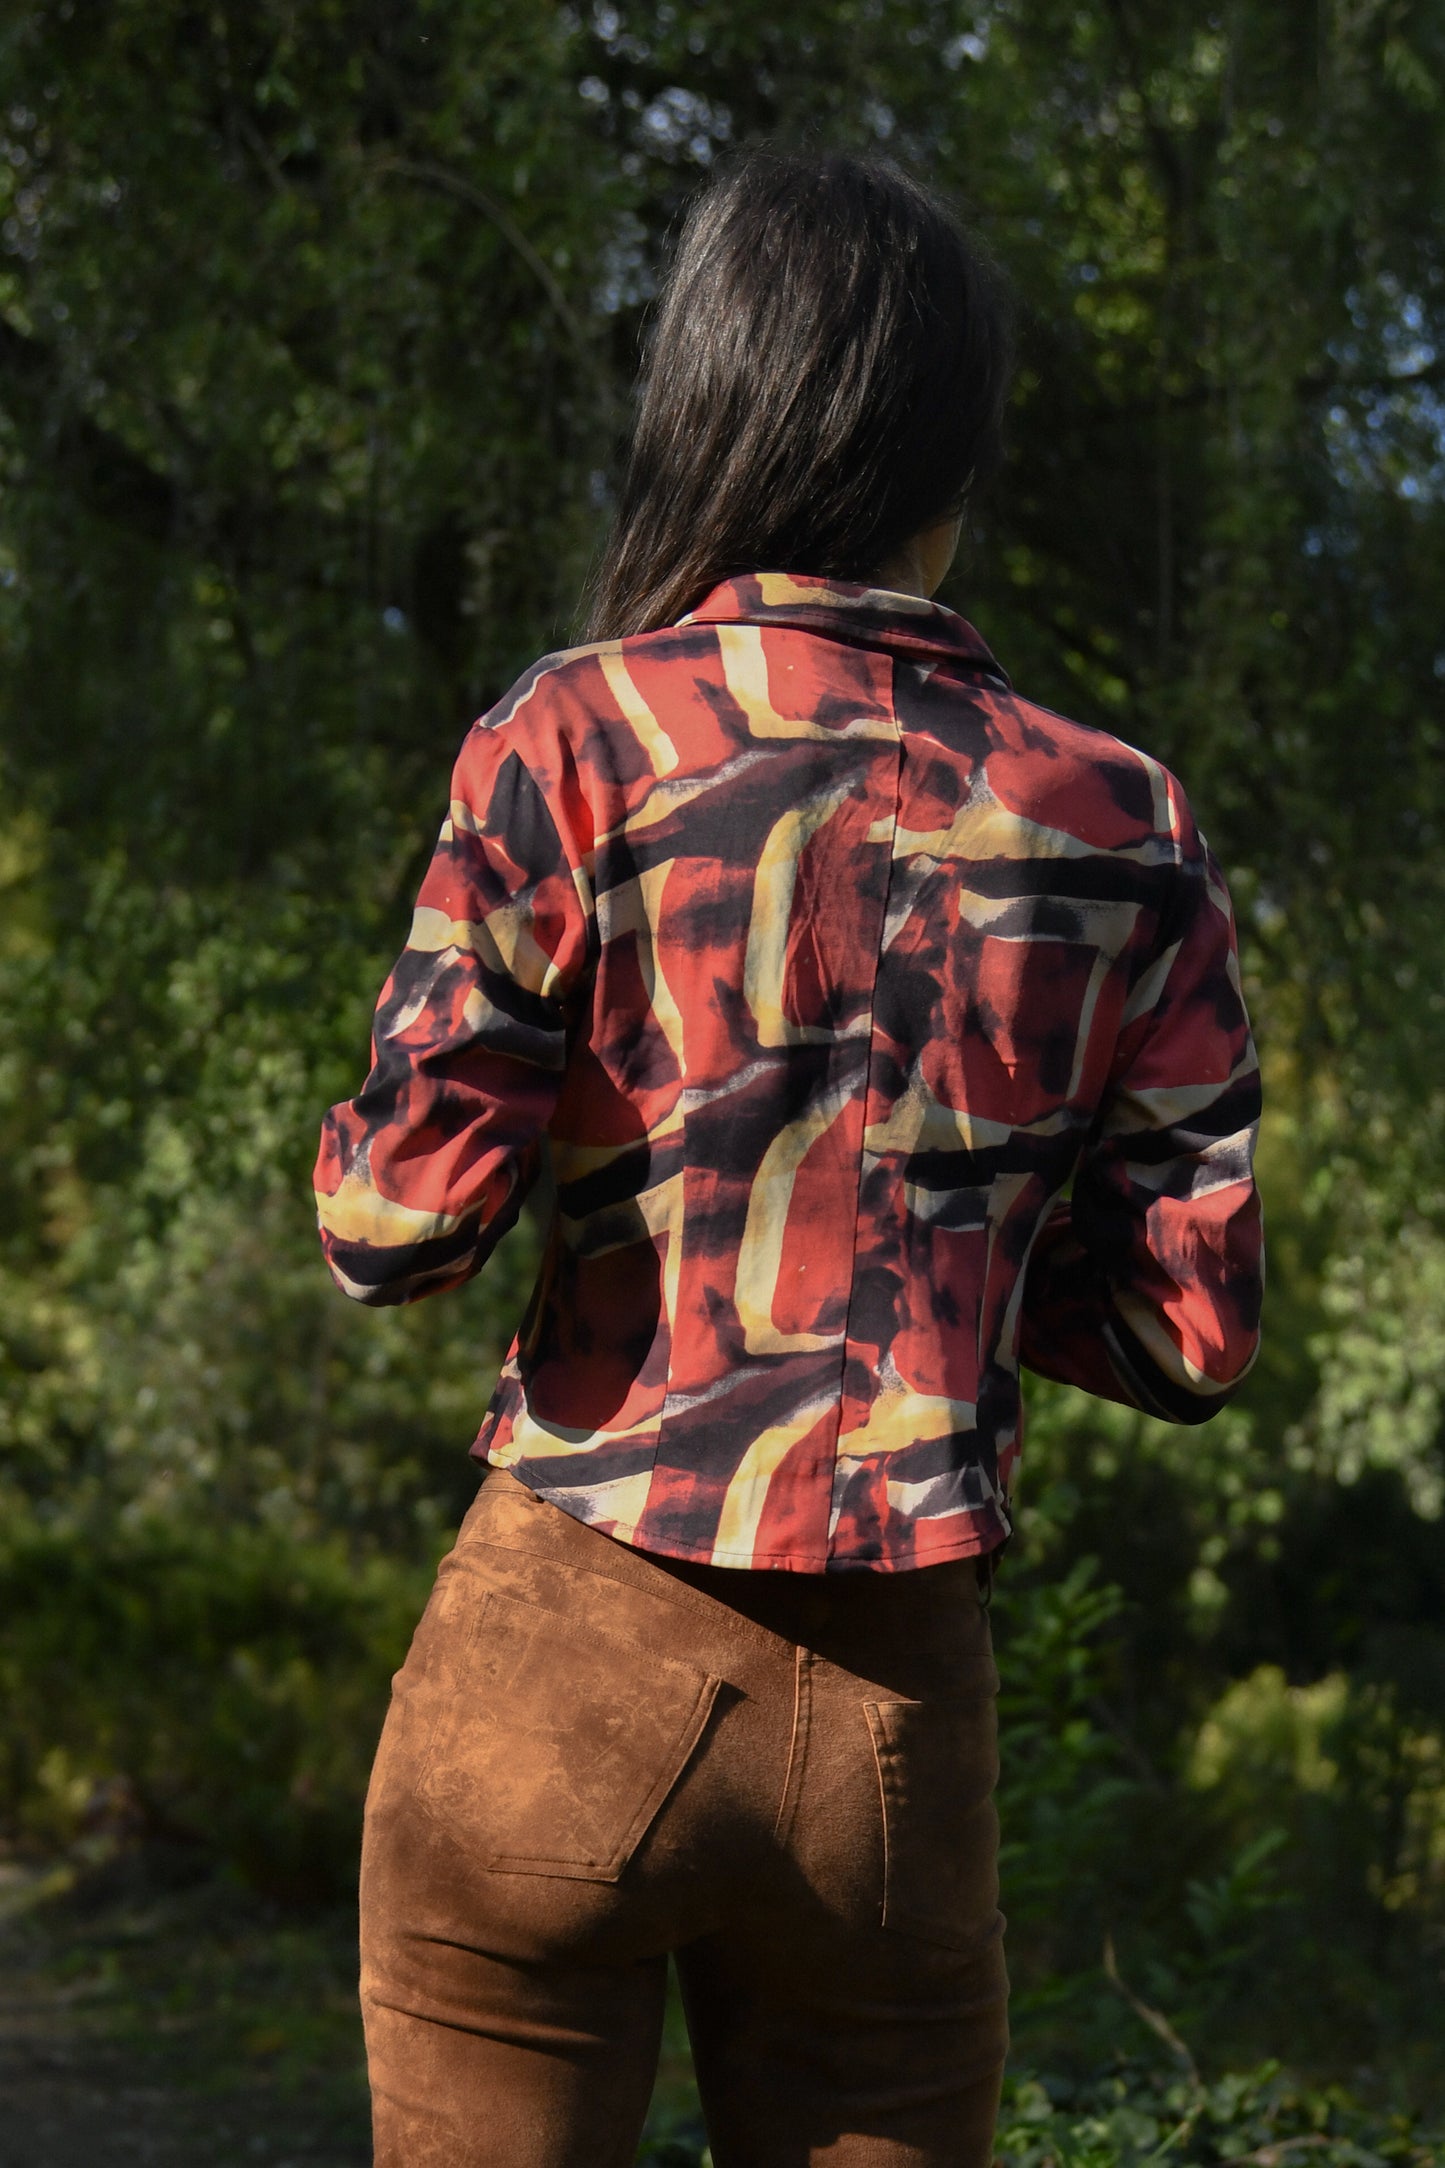 Iceberg 90s stretchy red & brown shirt with graphic print